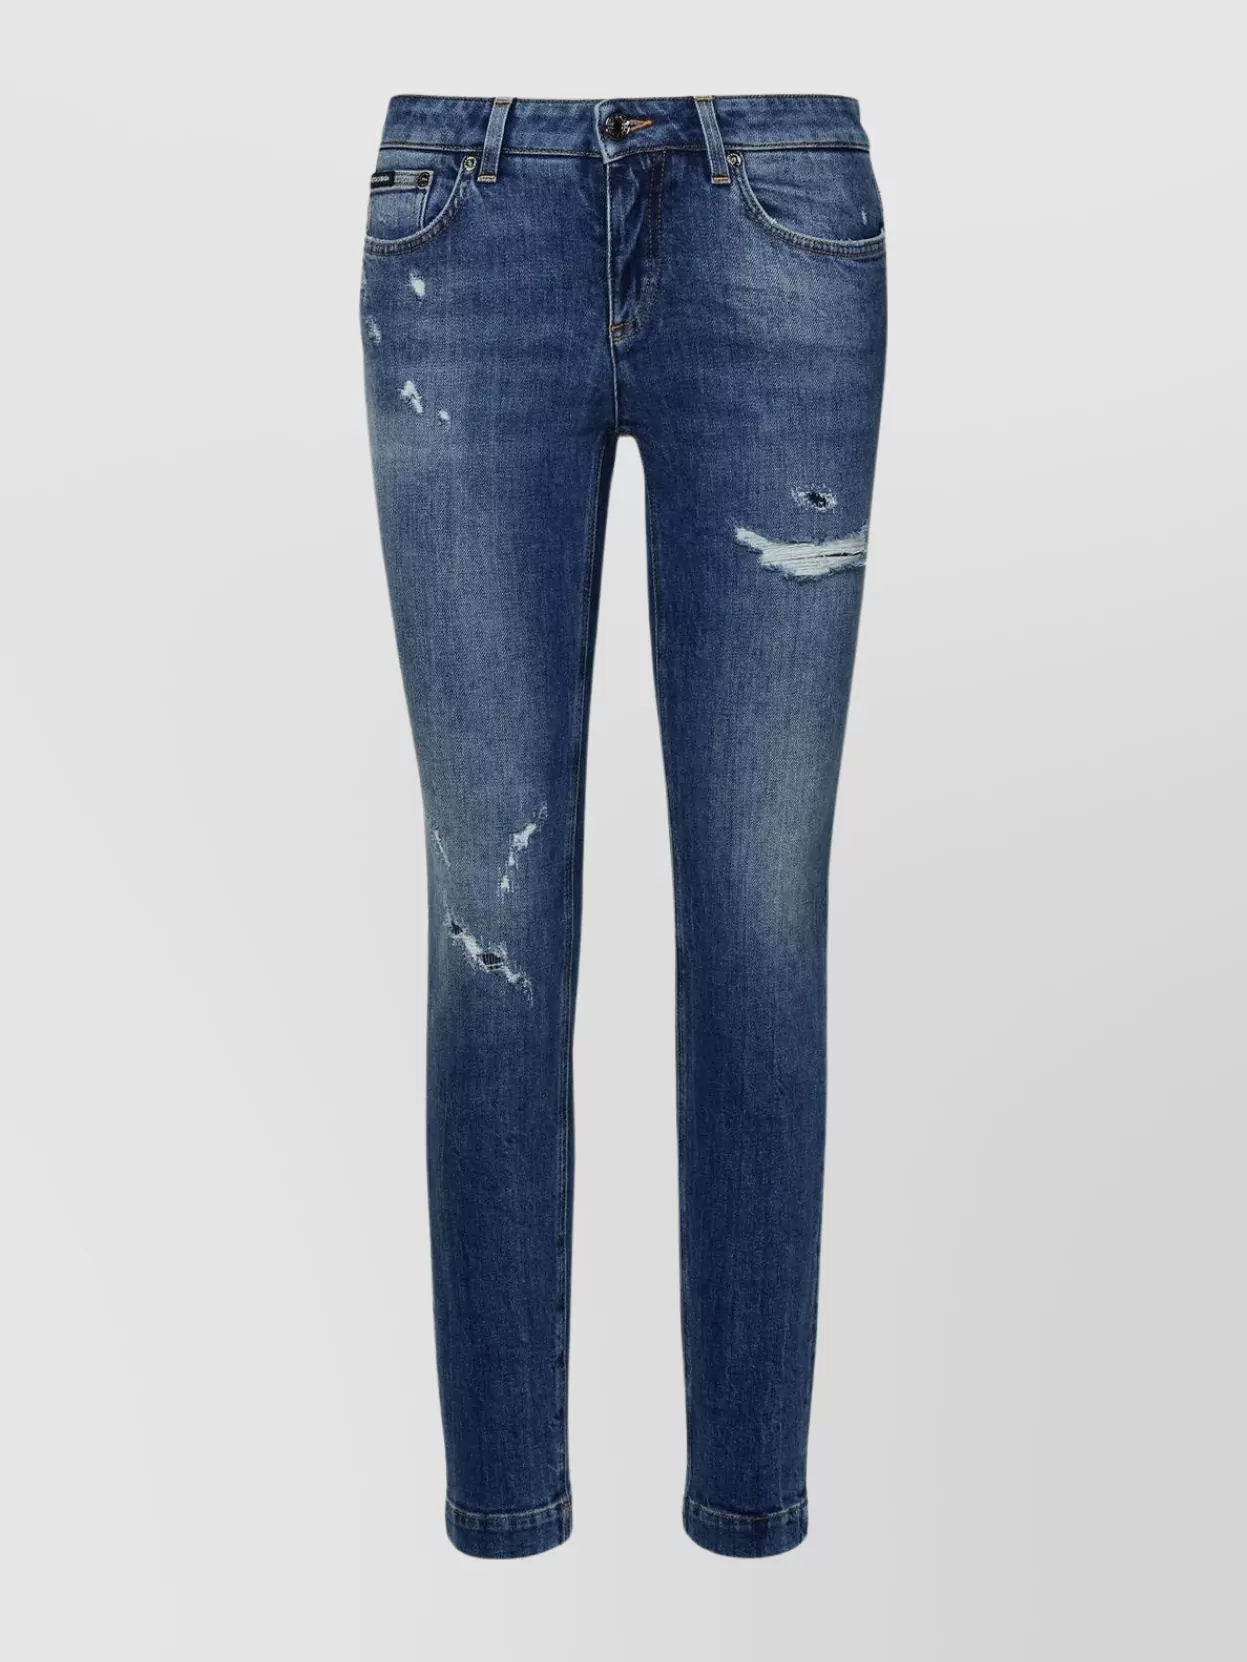 Dolce & Gabbana Distressed Cotton Denim Jeans With Belt Loops In Blue